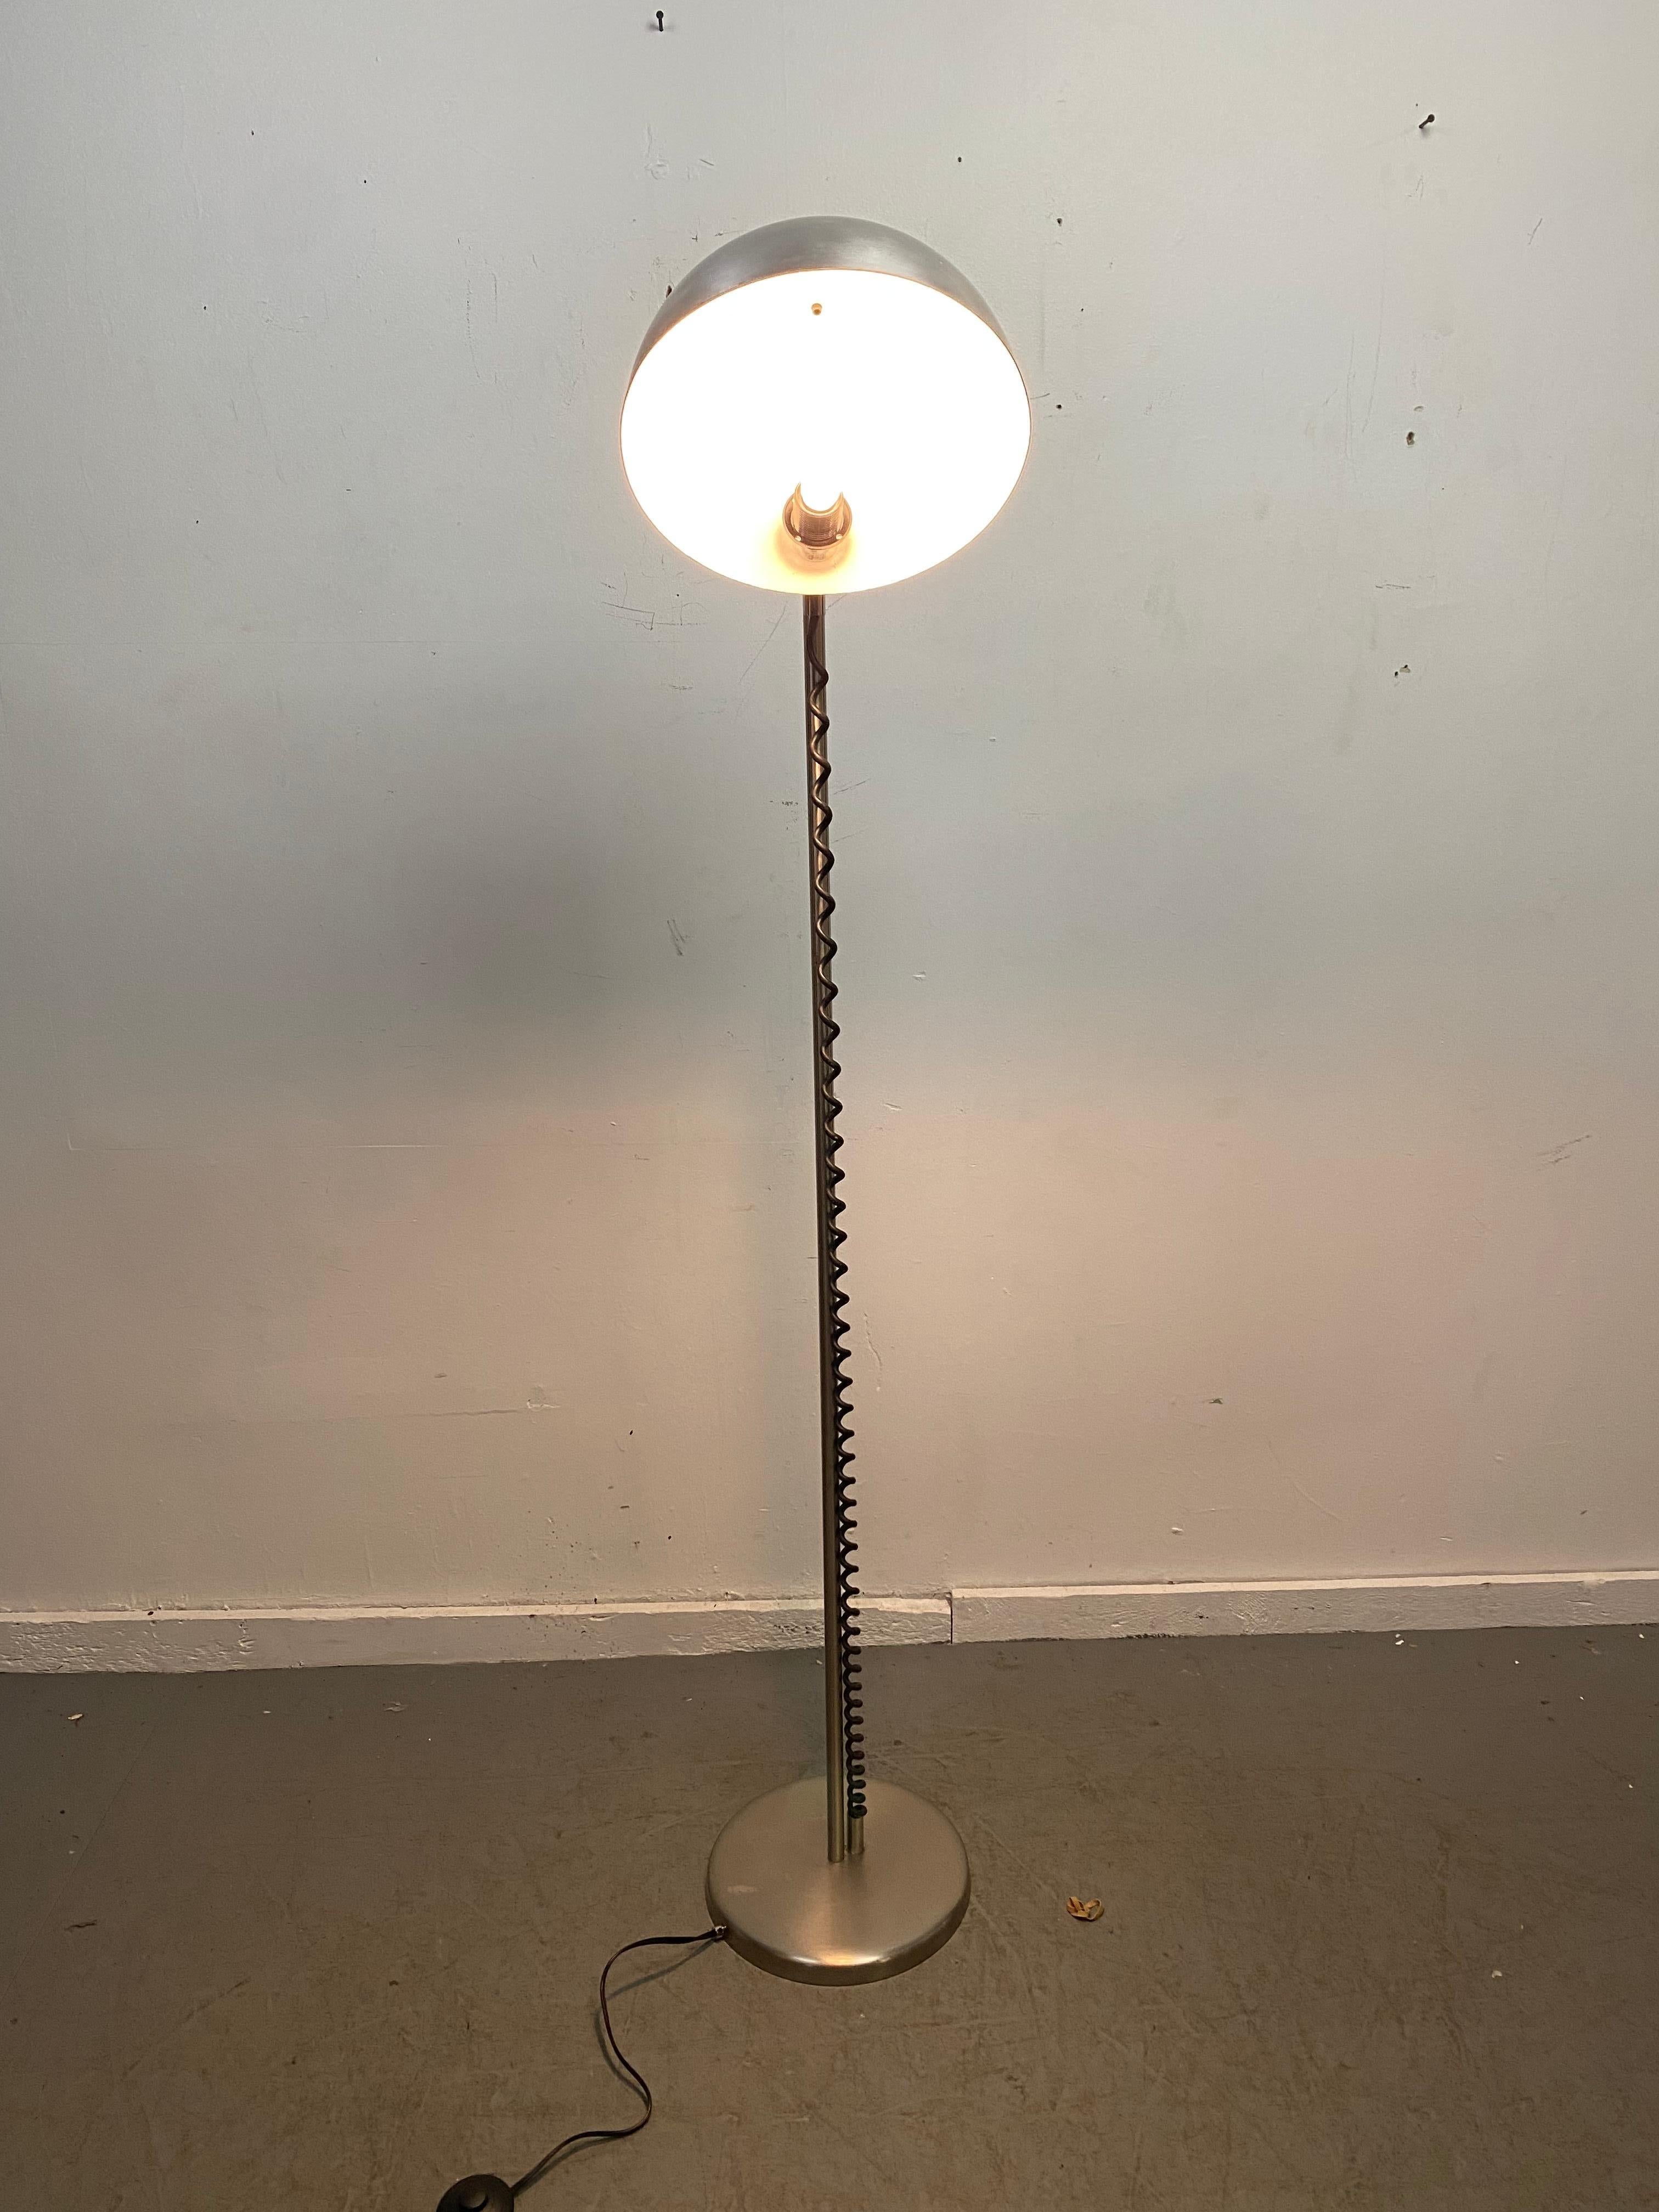 Unusual 1970s Bauhaus Inspired Adjustable Floor Lamp, Spun Aluminum Shade In Good Condition For Sale In Buffalo, NY